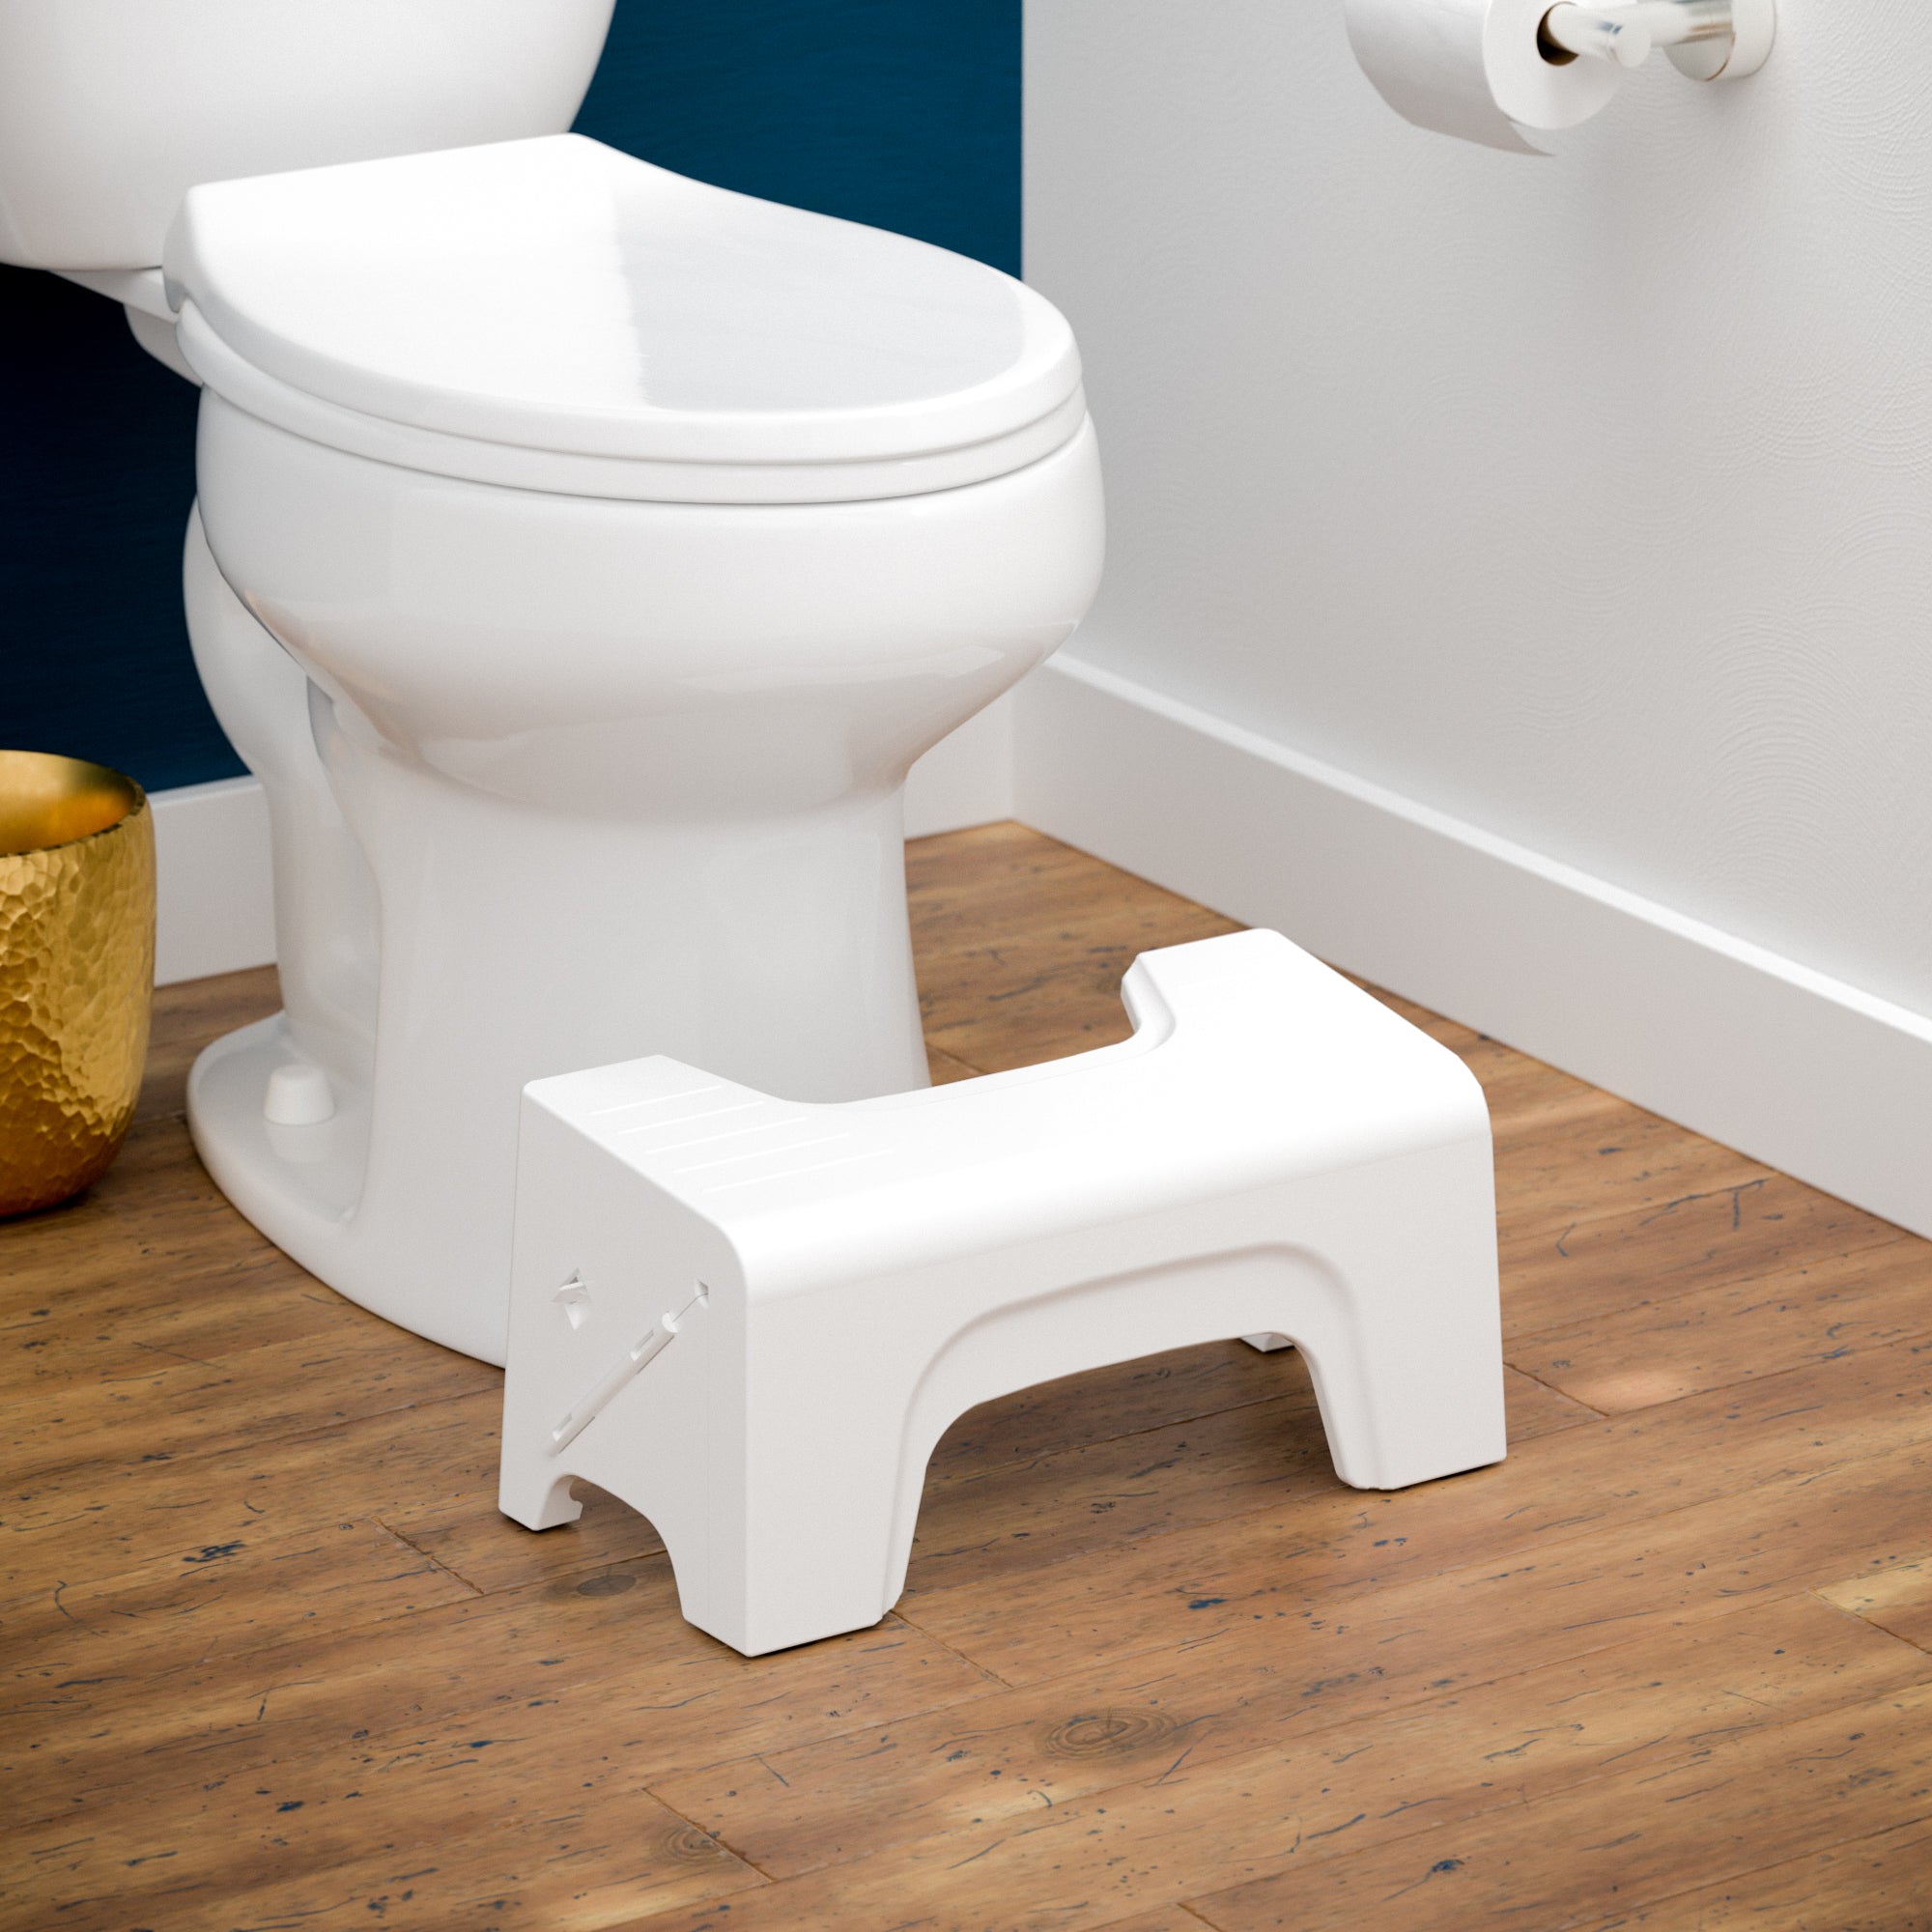 Squatty Potty Fold-N-Stow collapsible toilet stool